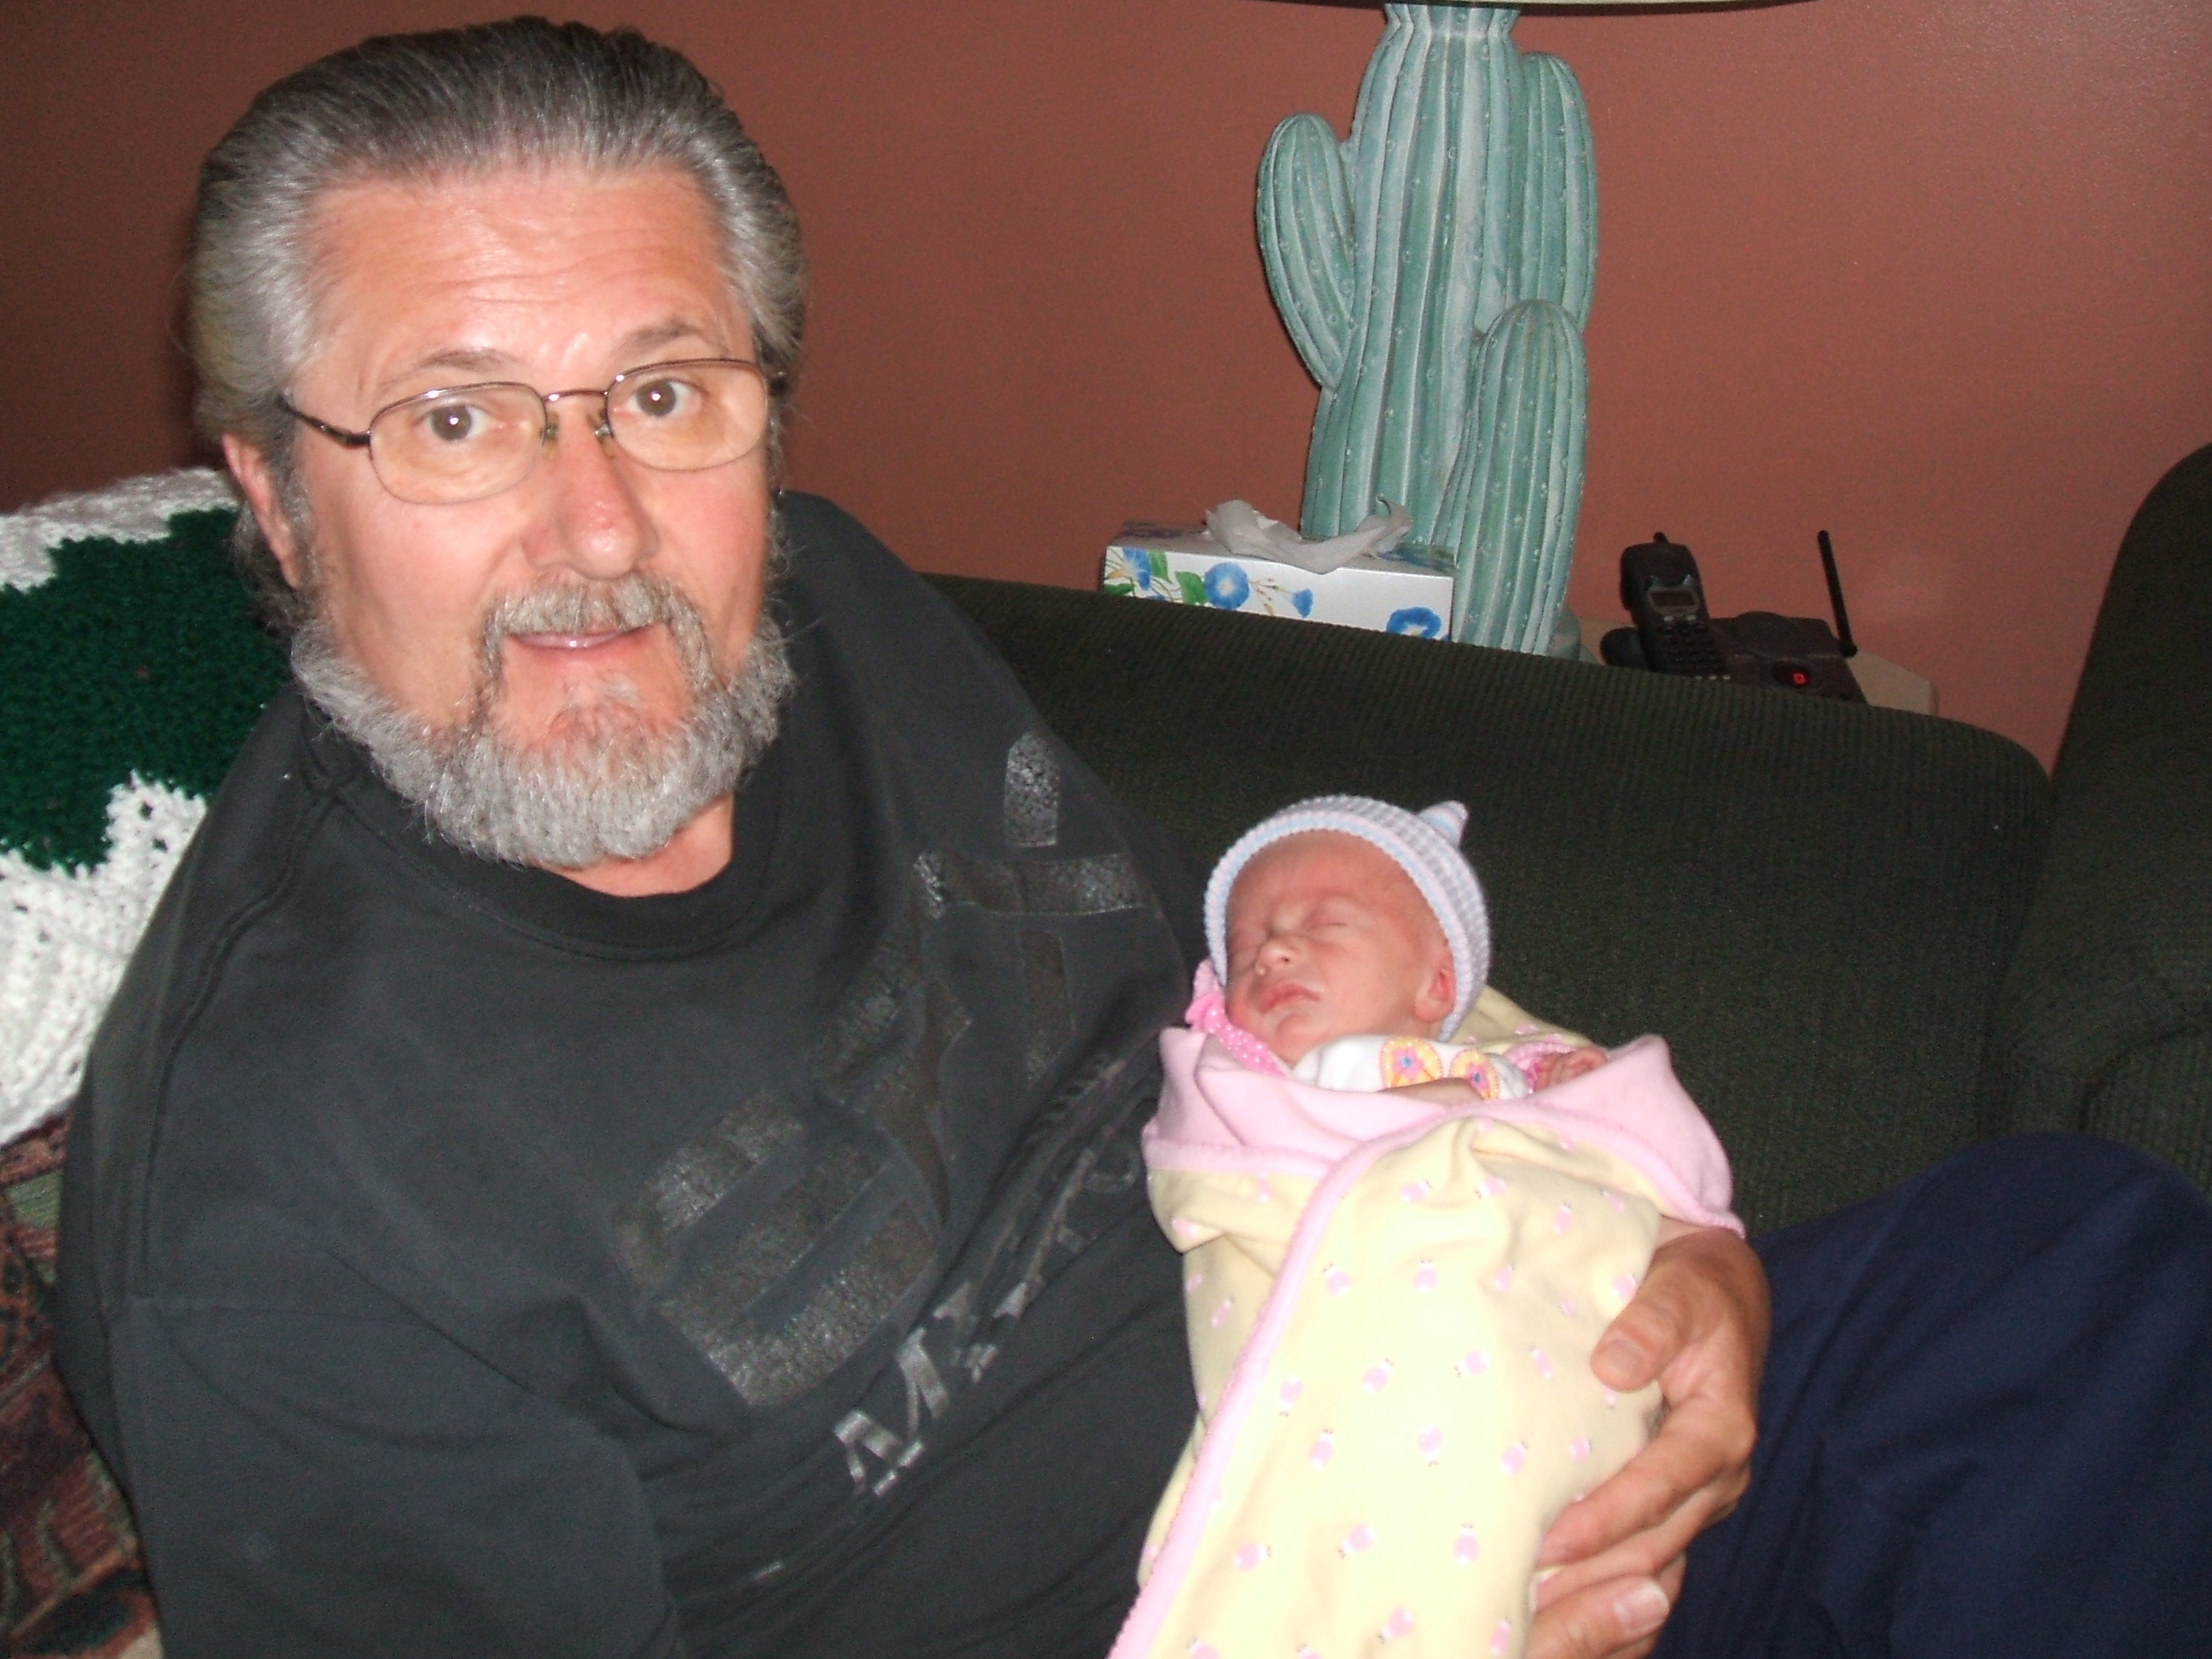 Robert with his Great Grand Daughter Hailee